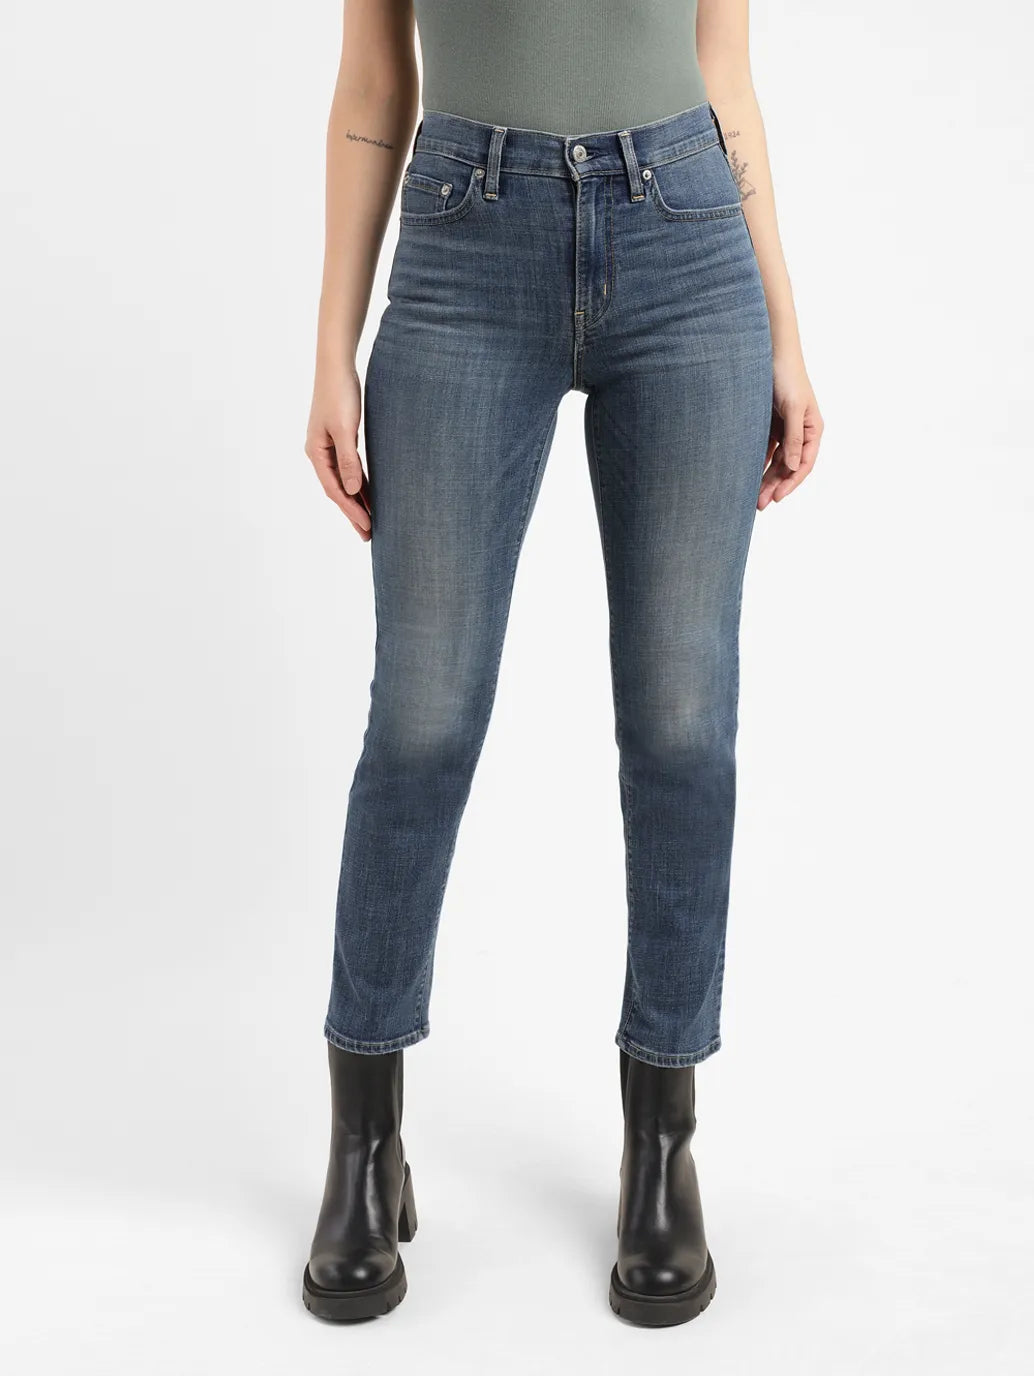 Women's Mid Rise 726 Flaired Fit Jeans